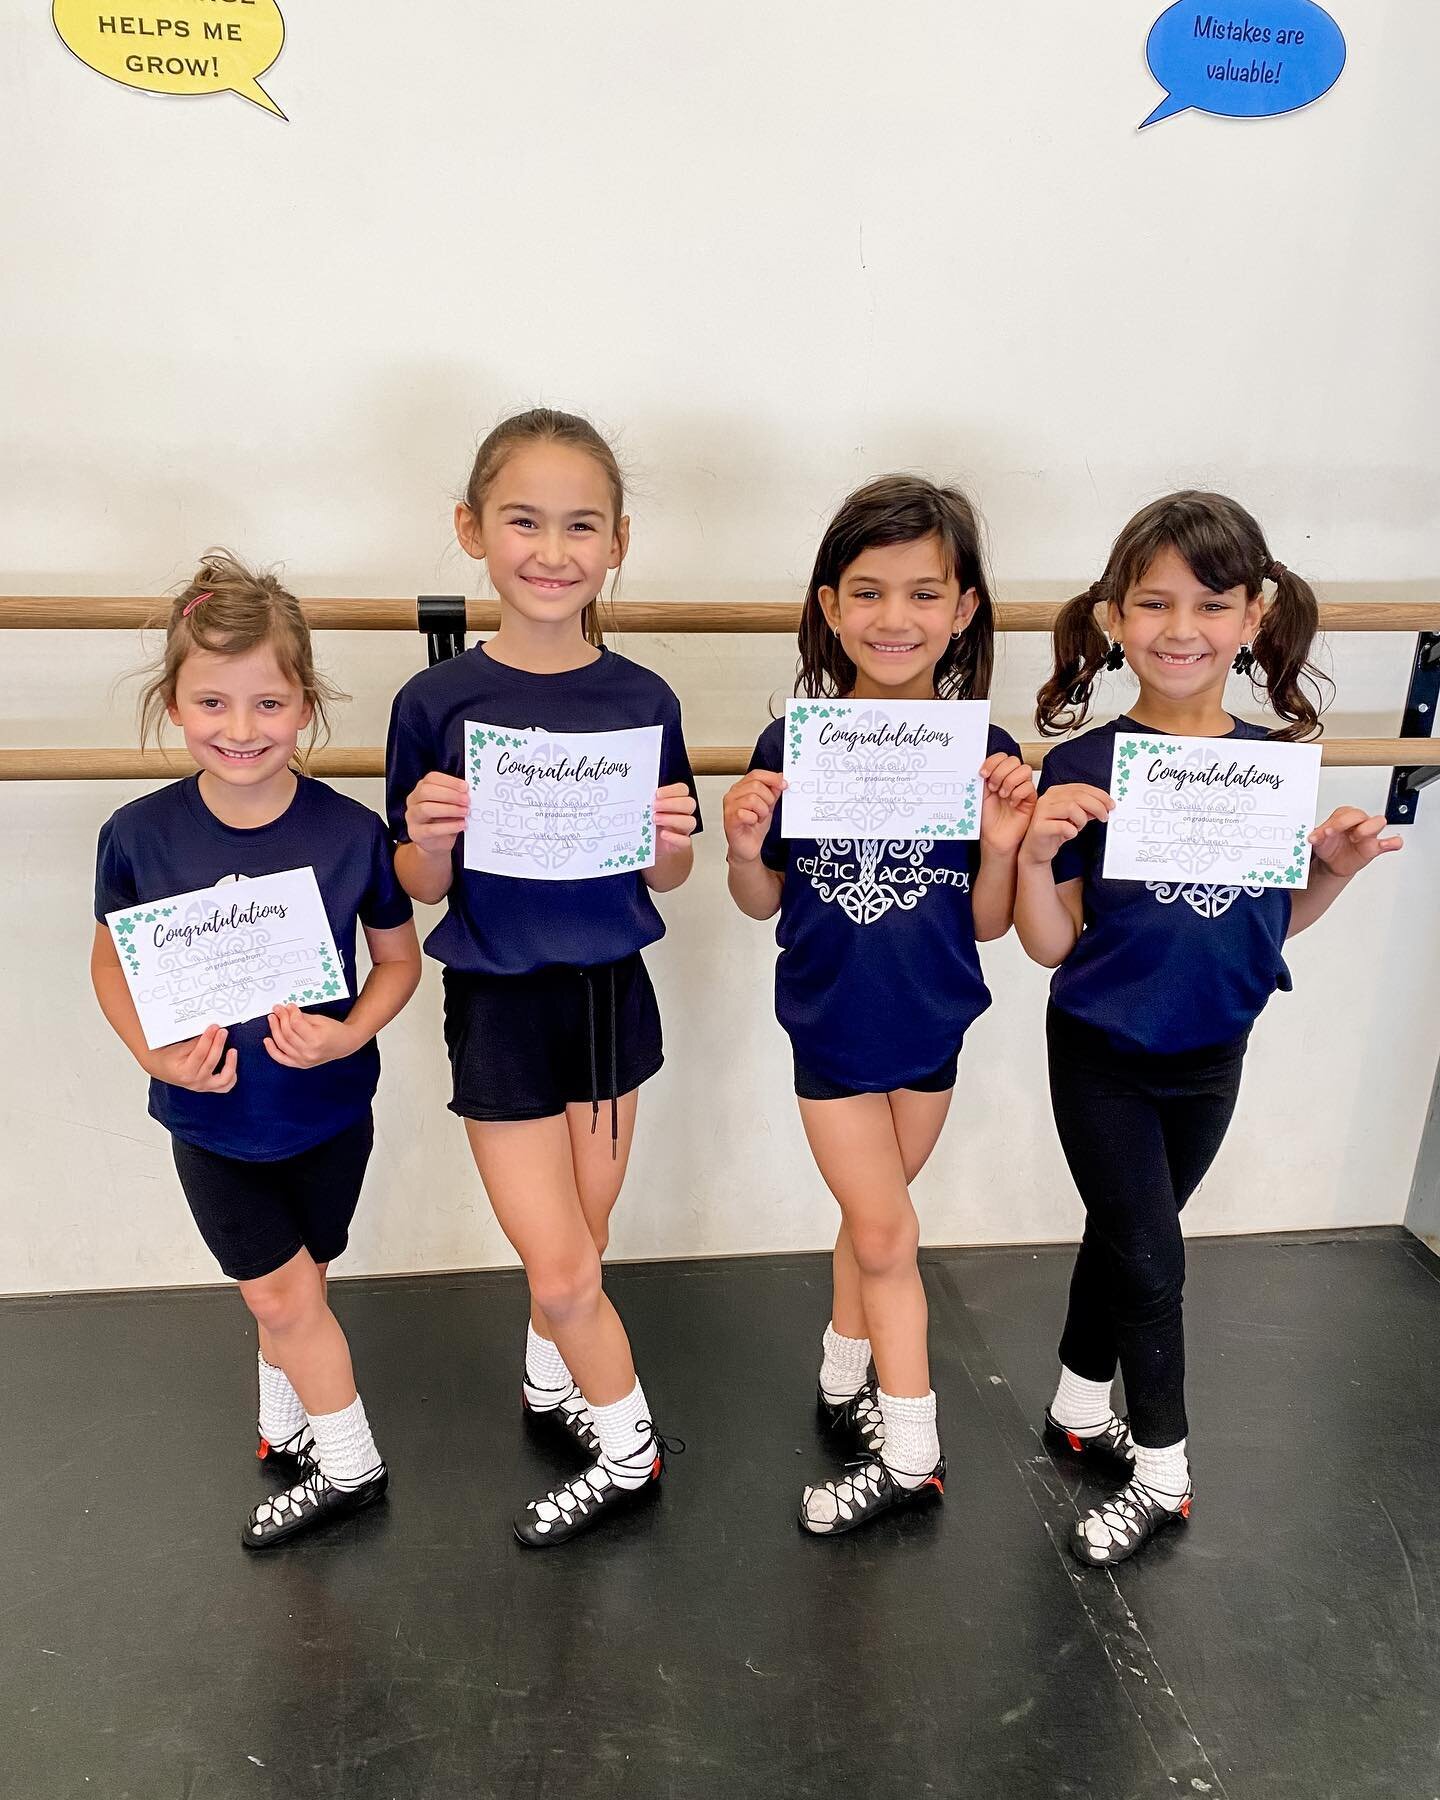 And that's a wrap on our Term 2
classes ✨
Congratulations to our little stars who are graduating up a class in Term 3. Well done Alice, Teannah, Sophia, Isabella, Ava, Maeve, Elspeth, Alanna, and Isla! 👩🏼&zwj;🎓☘️

#teamCA #teamCAminis #graduates #